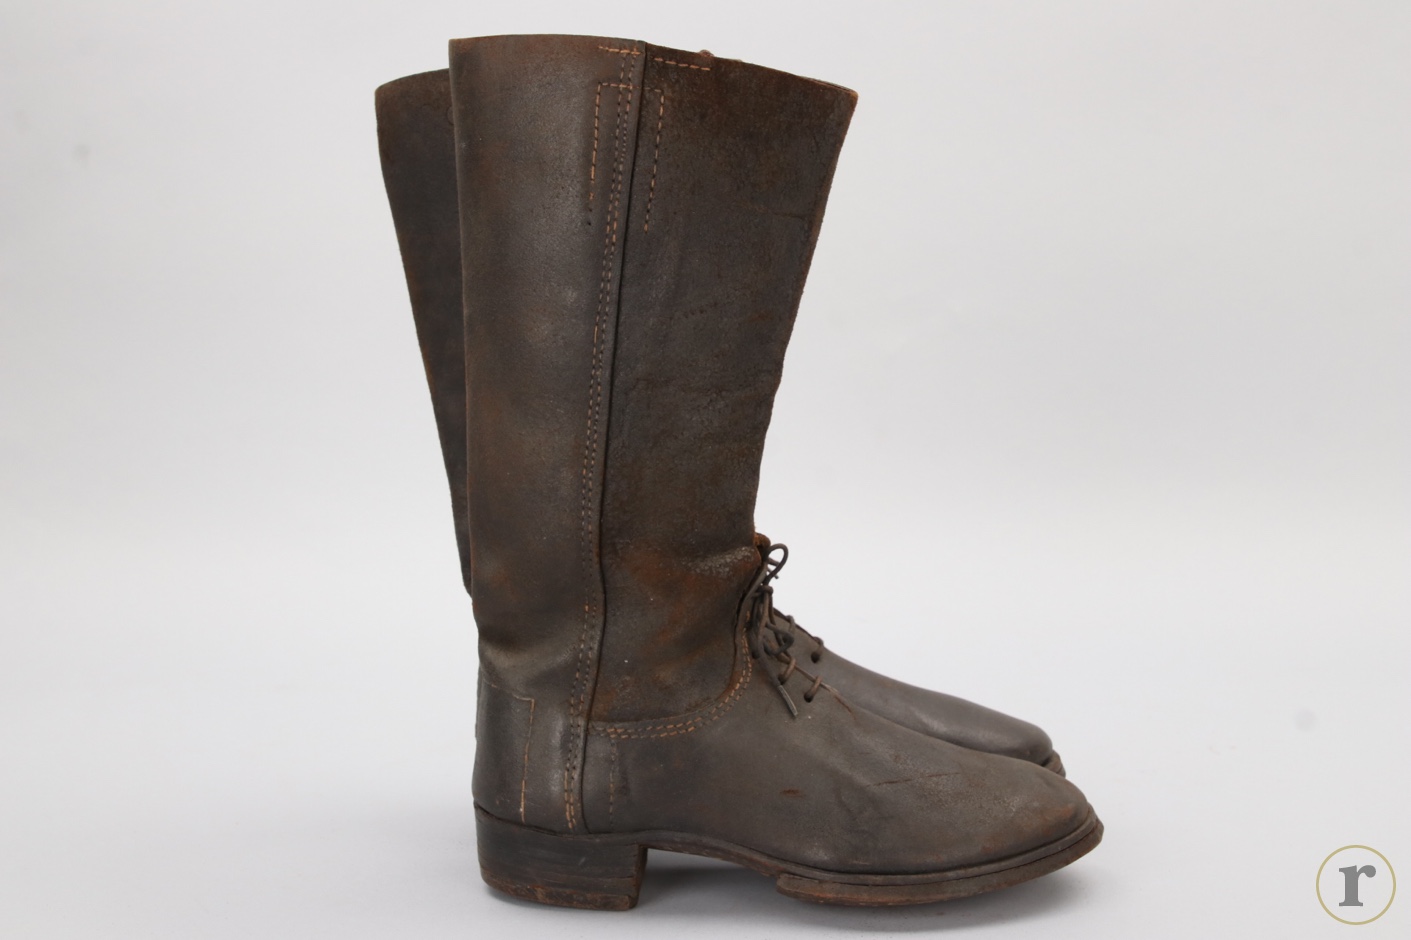 ratisbon's | Imperial Germany - WW1 officer's field boots | DISCOVER ...